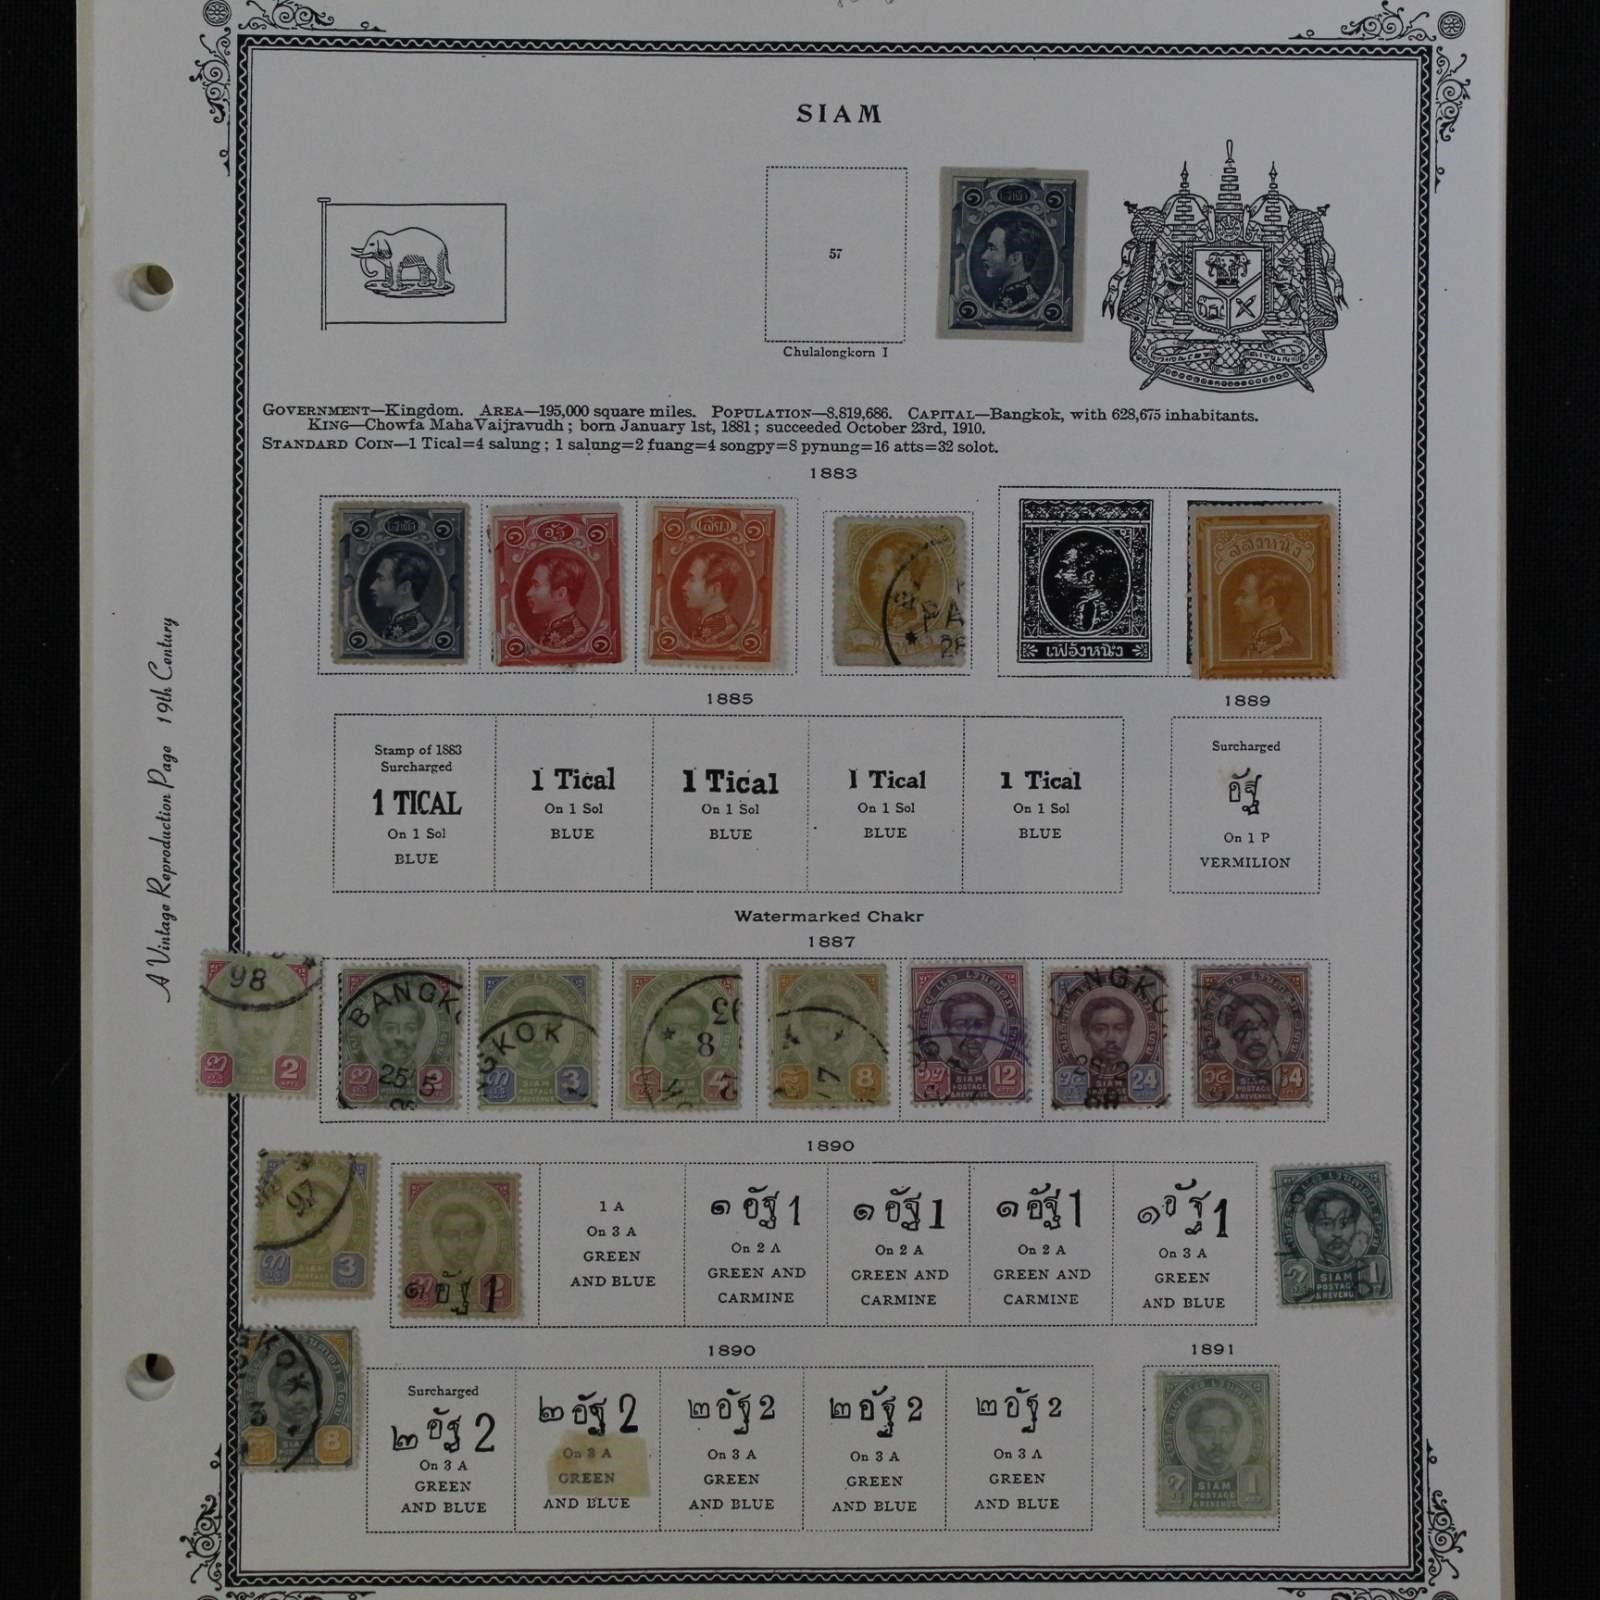 Dec 12th, 2021 Weekly Stamps & Sports Cards Auction